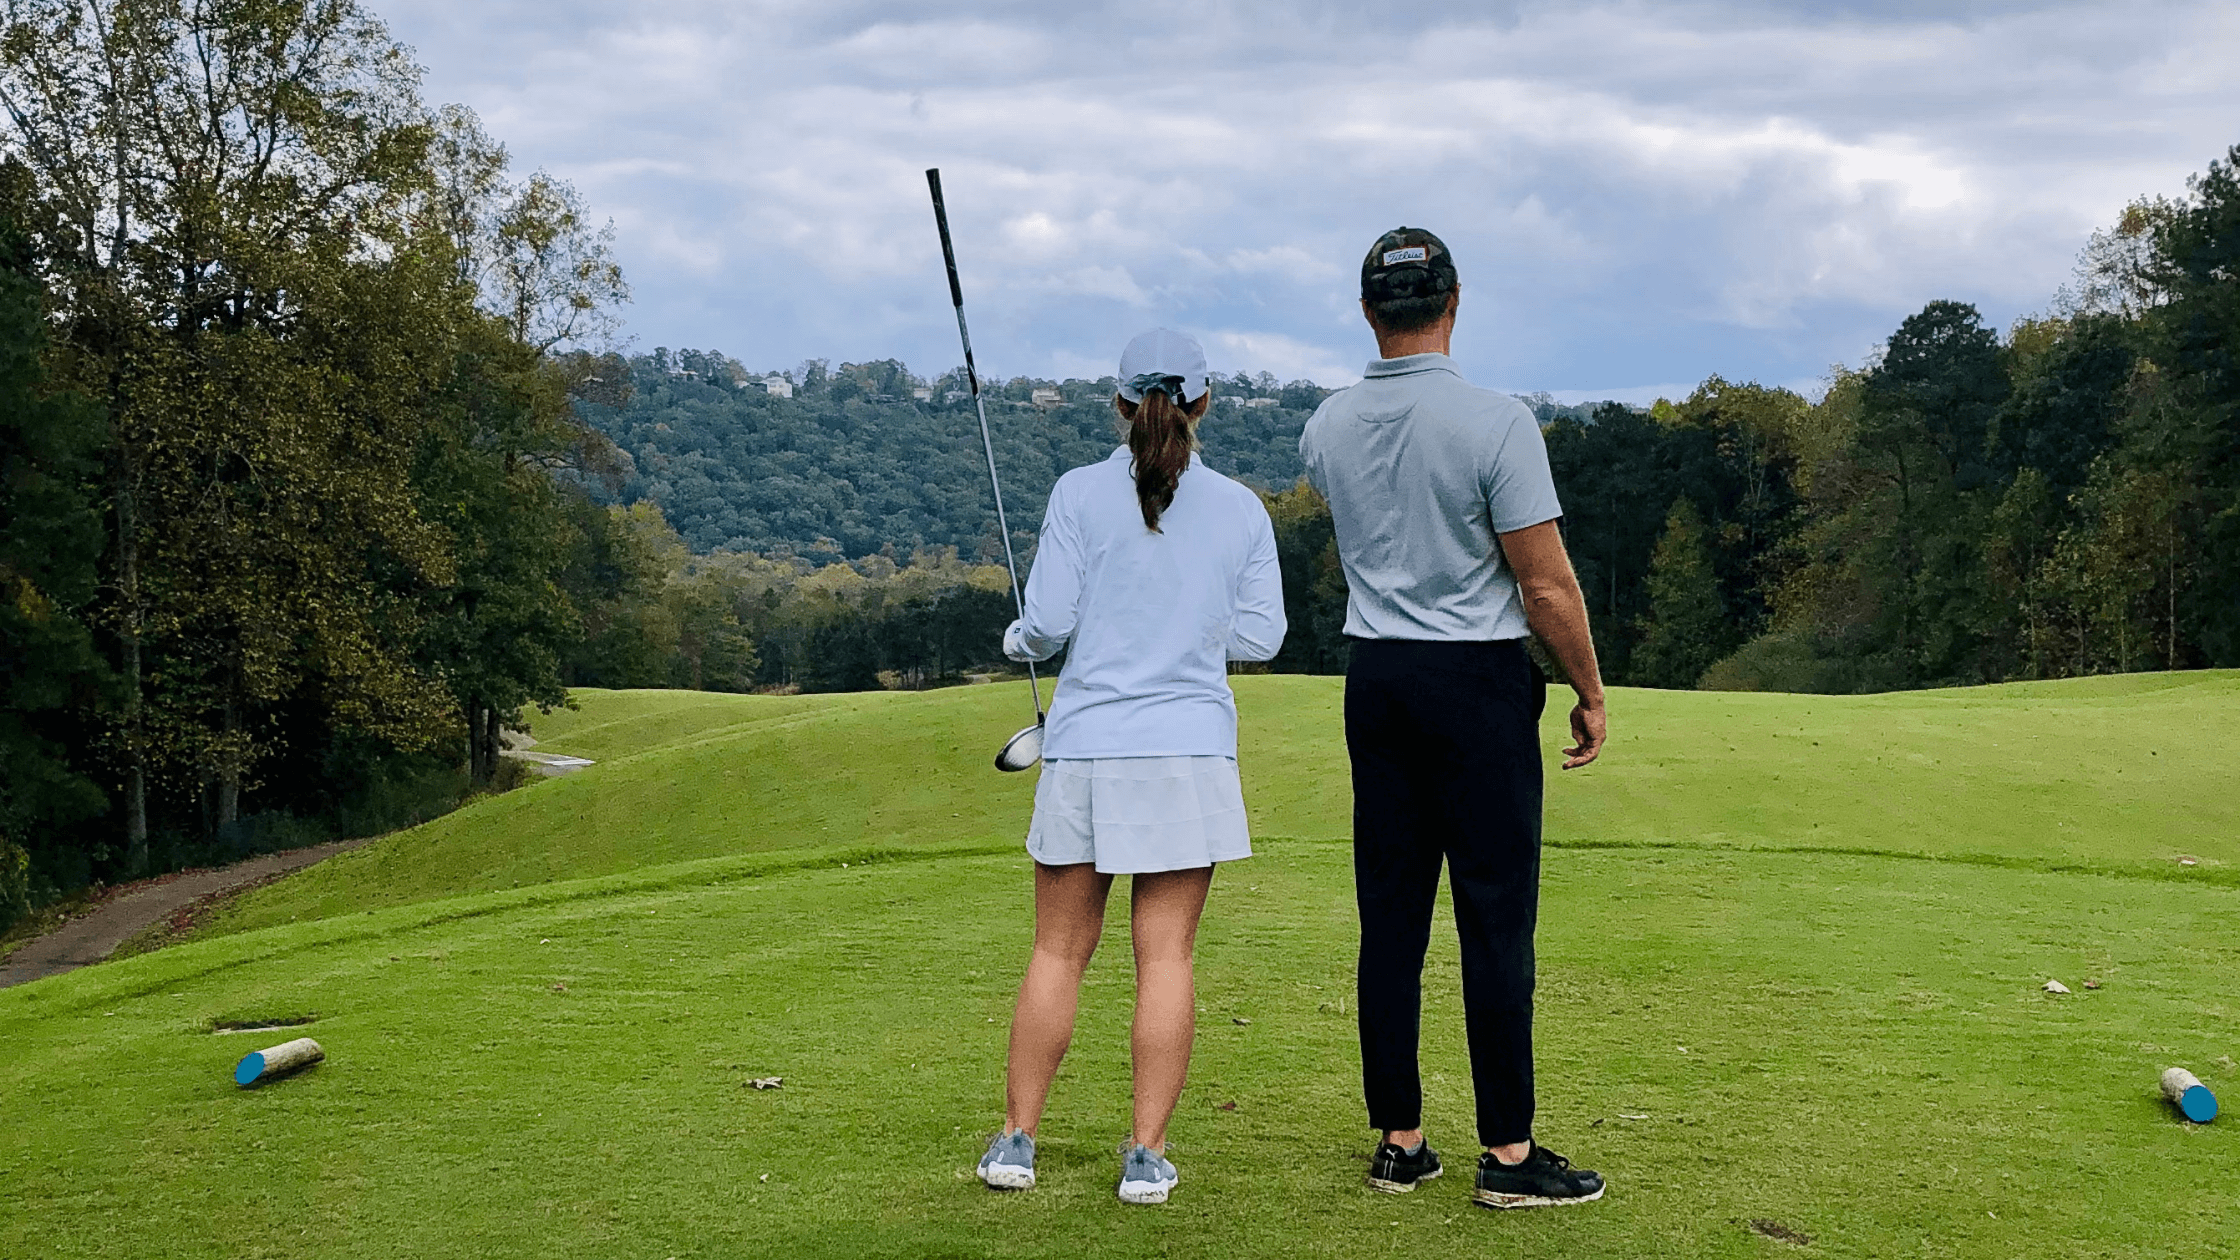 How Do I Choose the Right Golf Instructor? Sport and Personal Qualities To Look For